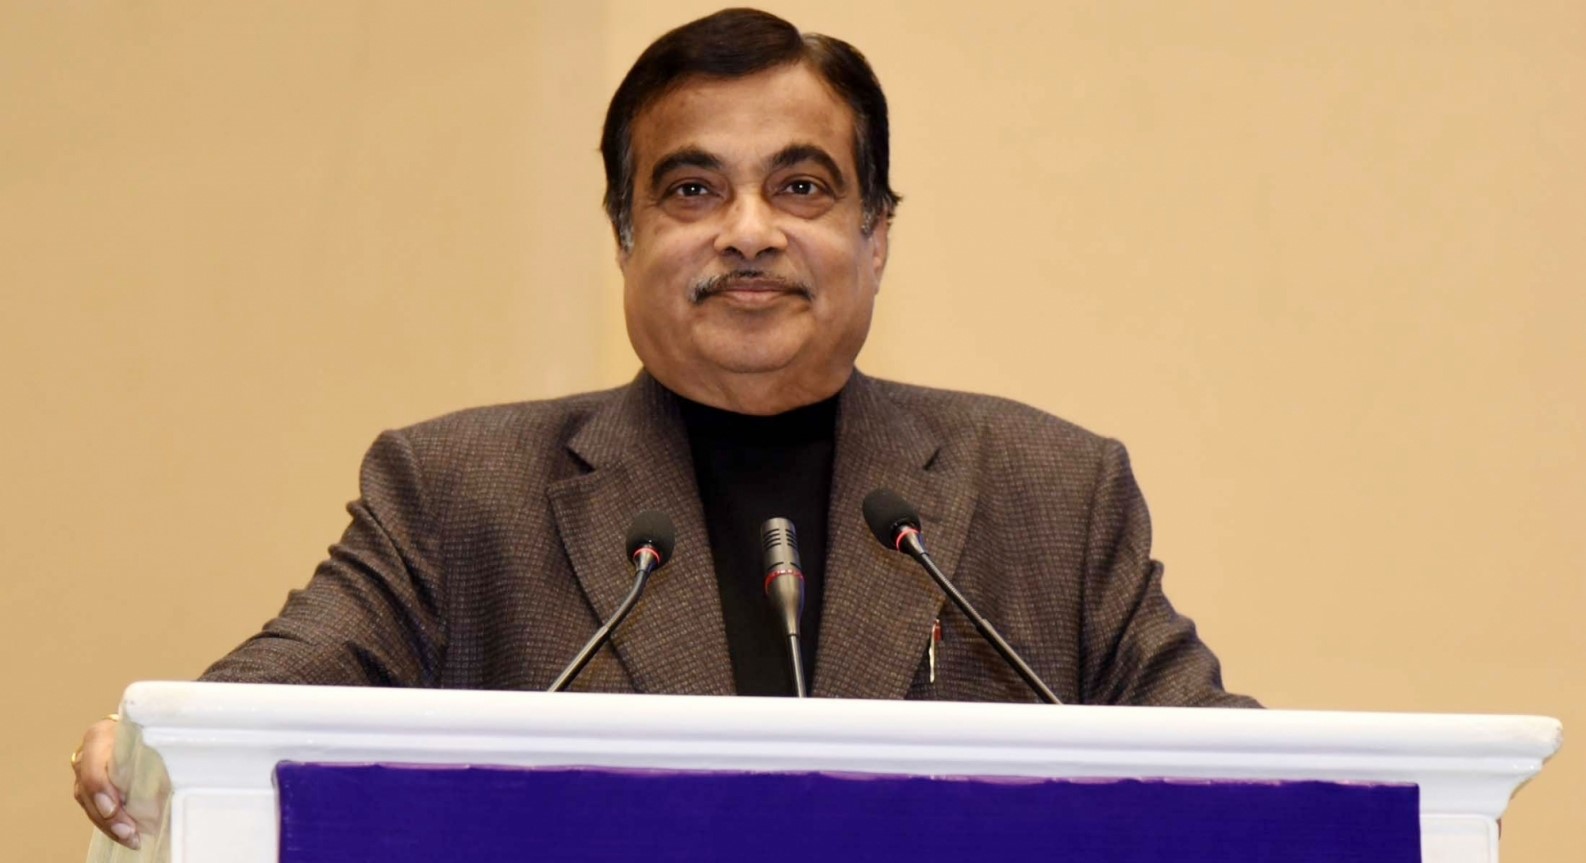 Not in PM race and 'tireless work' is my mantra, says Gadkari